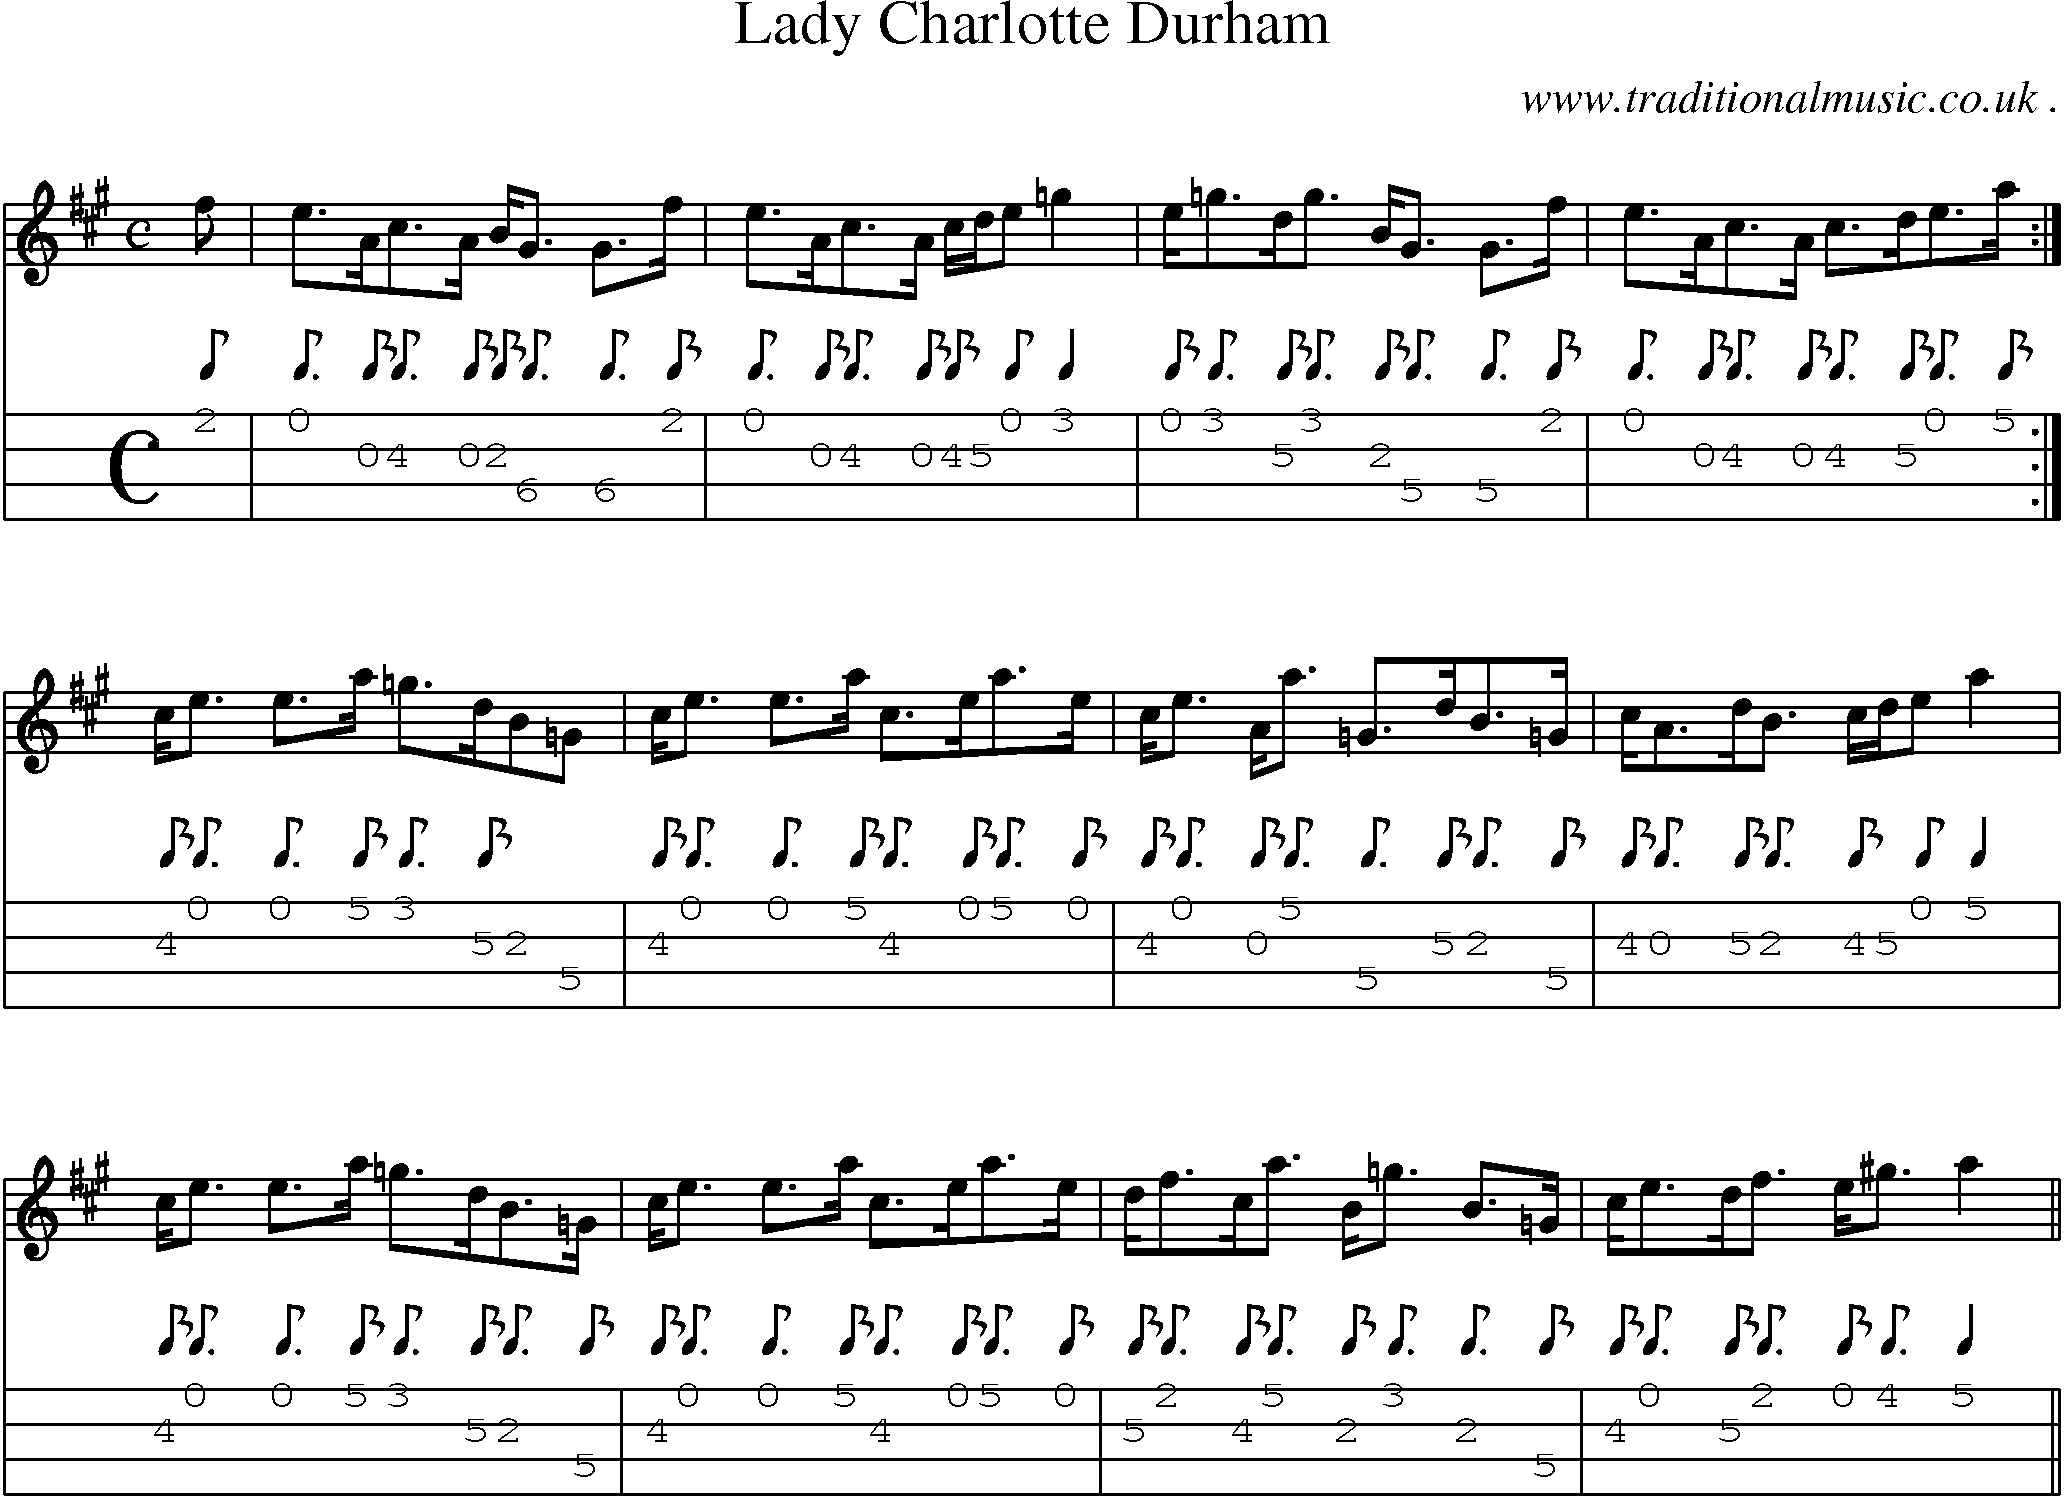 Sheet-music  score, Chords and Mandolin Tabs for Lady Charlotte Durham 